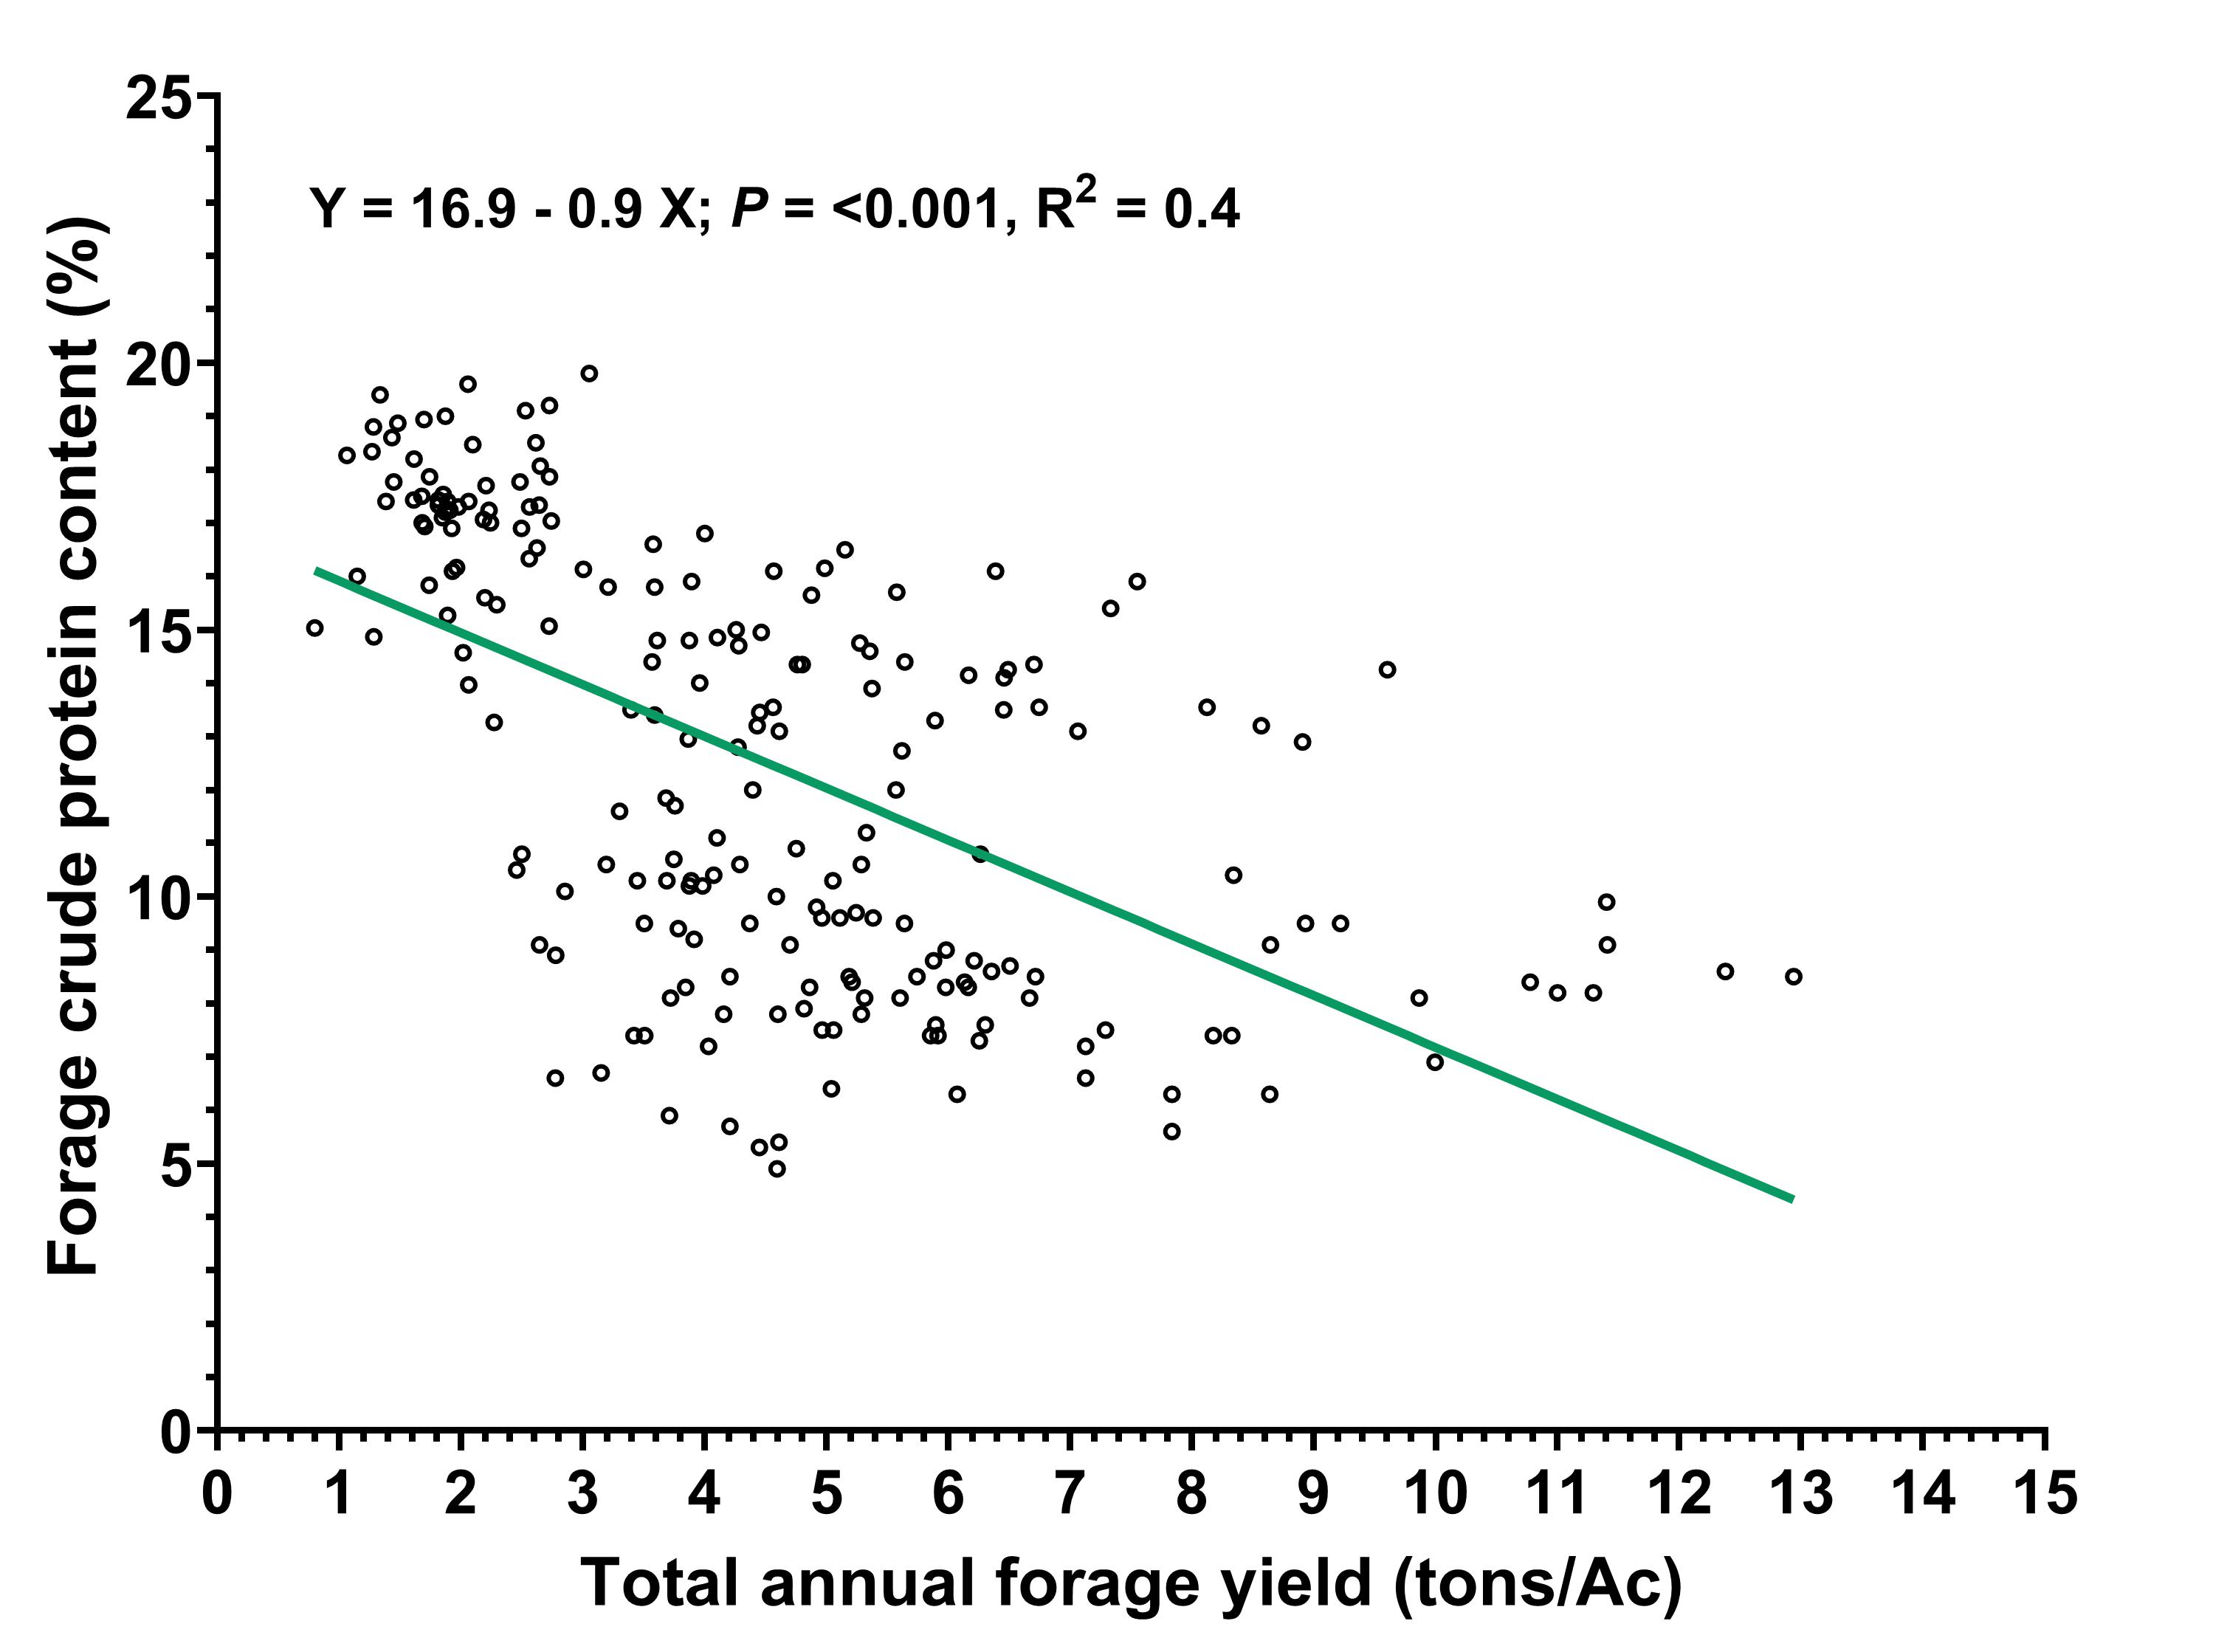 Scatter plot showing the relationship between forage crude protein content (%) x-axis and total annual forage yield (tons/Ac) x-axis